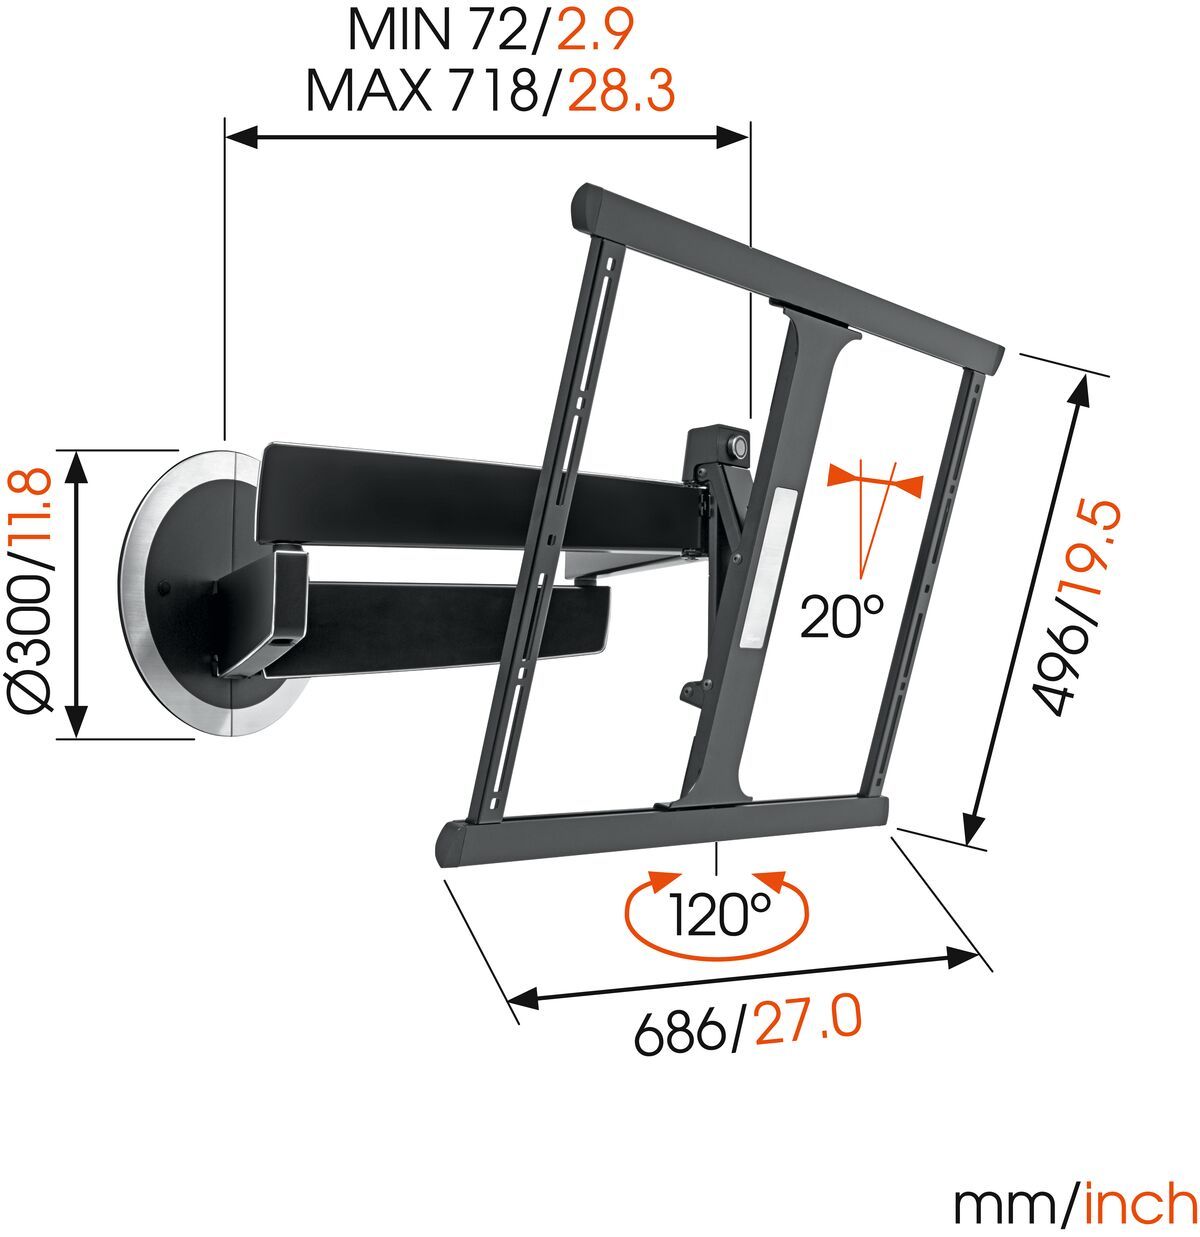 Vogel's DesignMount (NEXT 7345) Full-Motion TV Wall Mount - Suitable for 40 up to 65 inch TVs up to Motion (up to 120°) - Dimensions